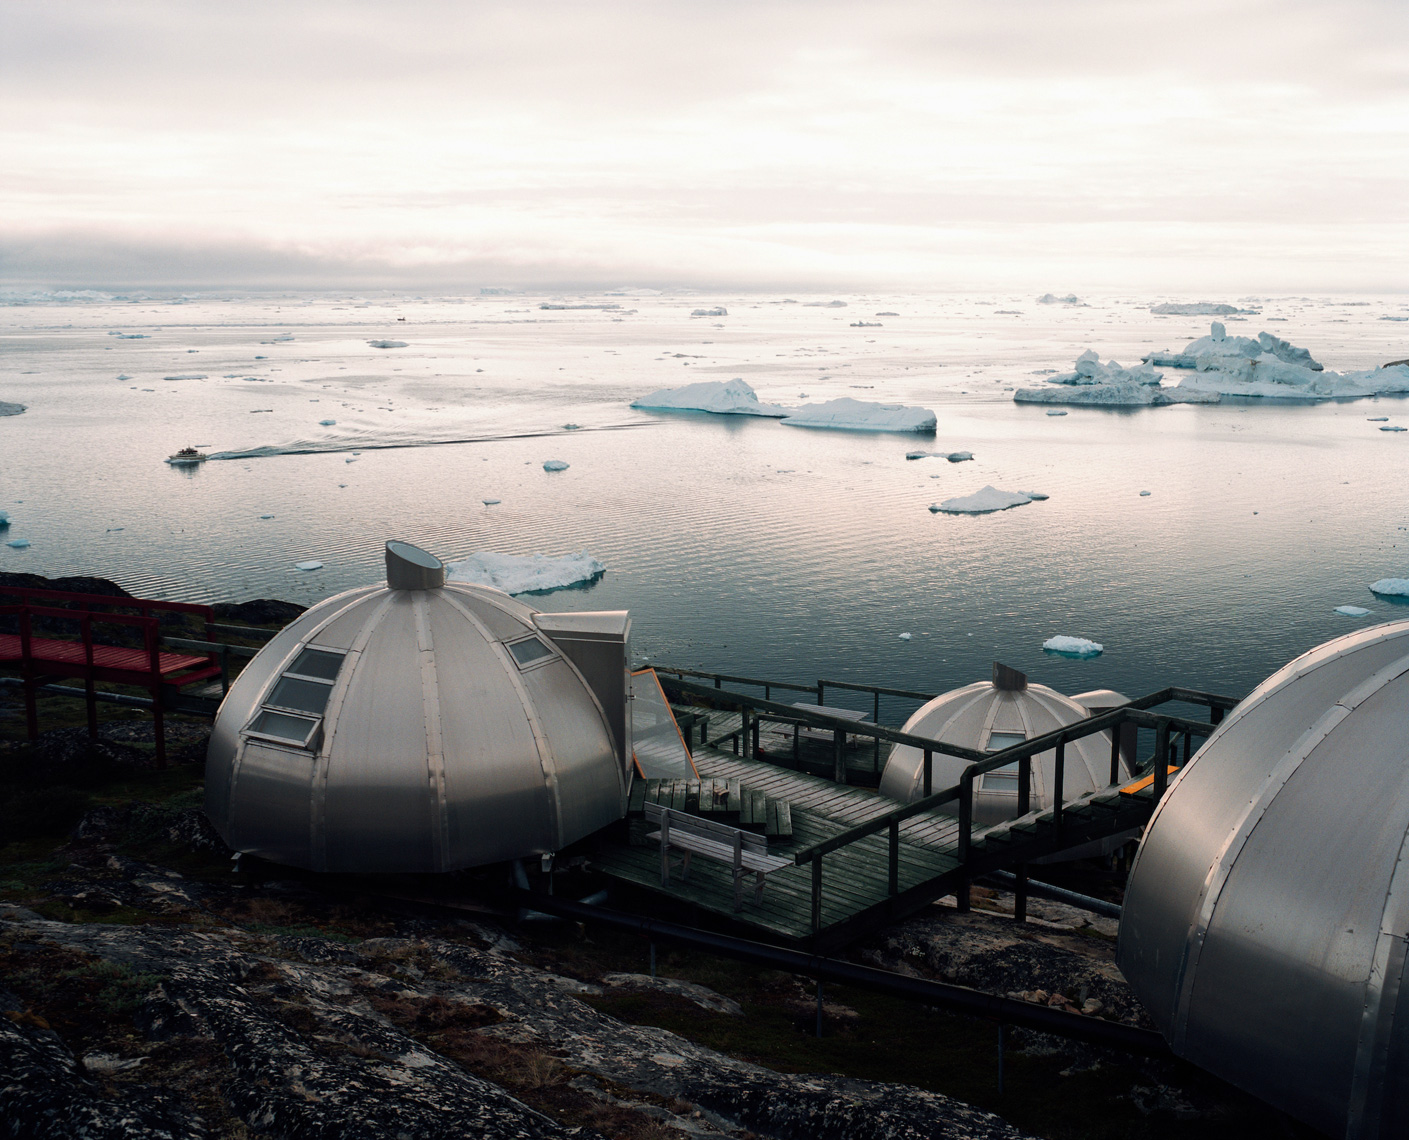 GREENLAND, Ilulissat, Disco Bay, elevated view of Hotel Arctic with icebergs and the sea in the background